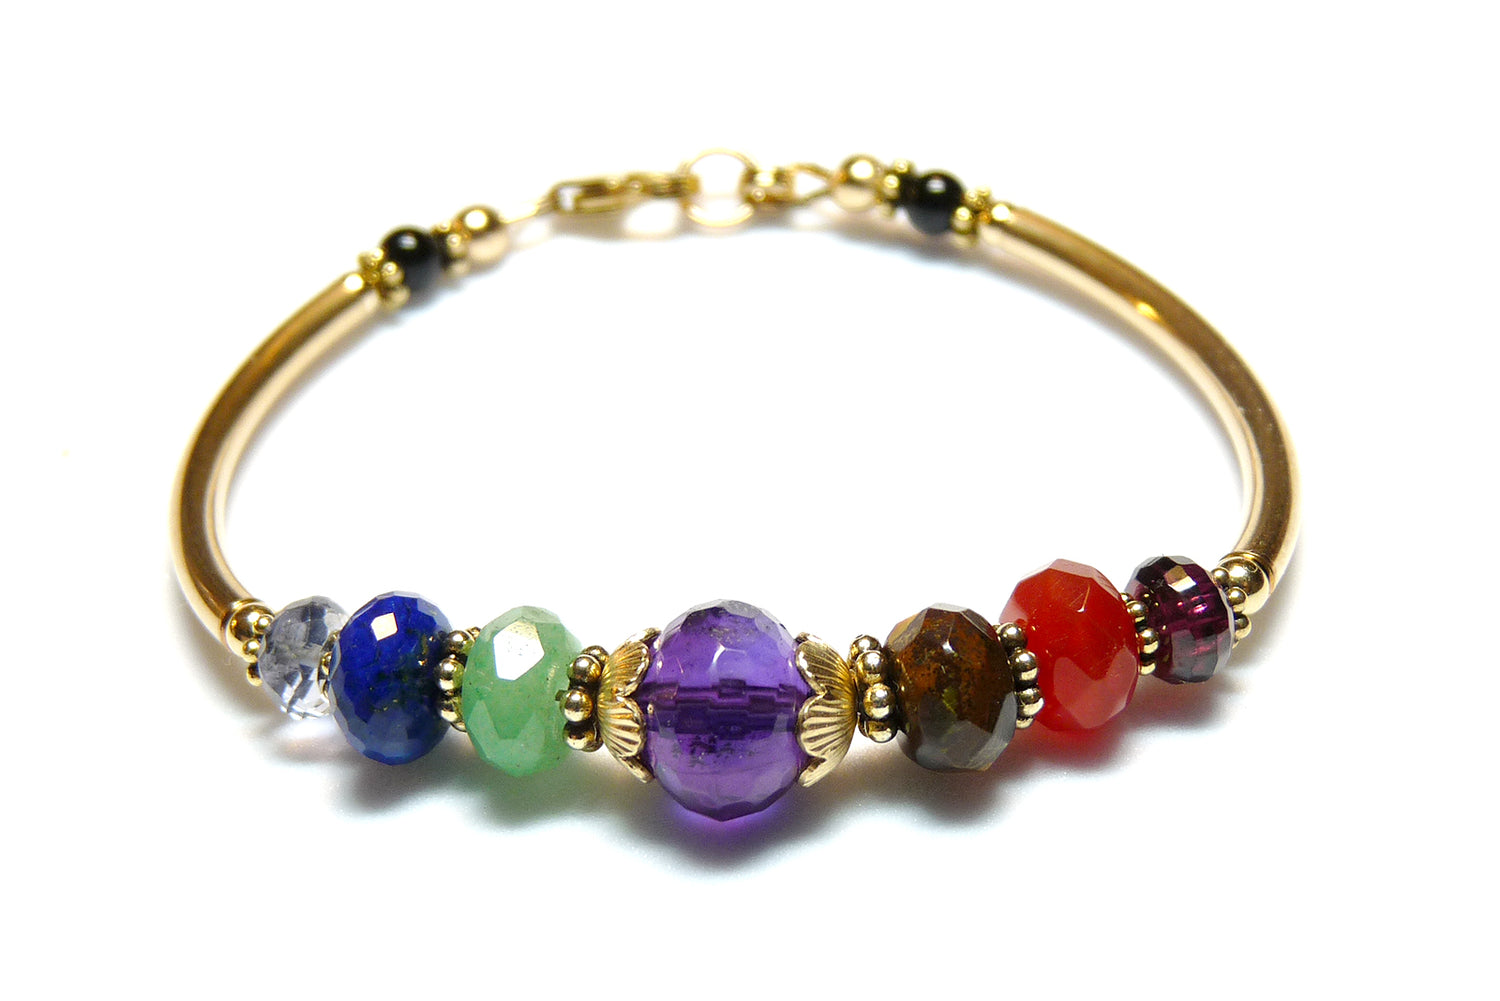 7 Chakra Bracelet with Crystals for Protection, Mindfulness Gifts, Gemstones for Meditation B7040